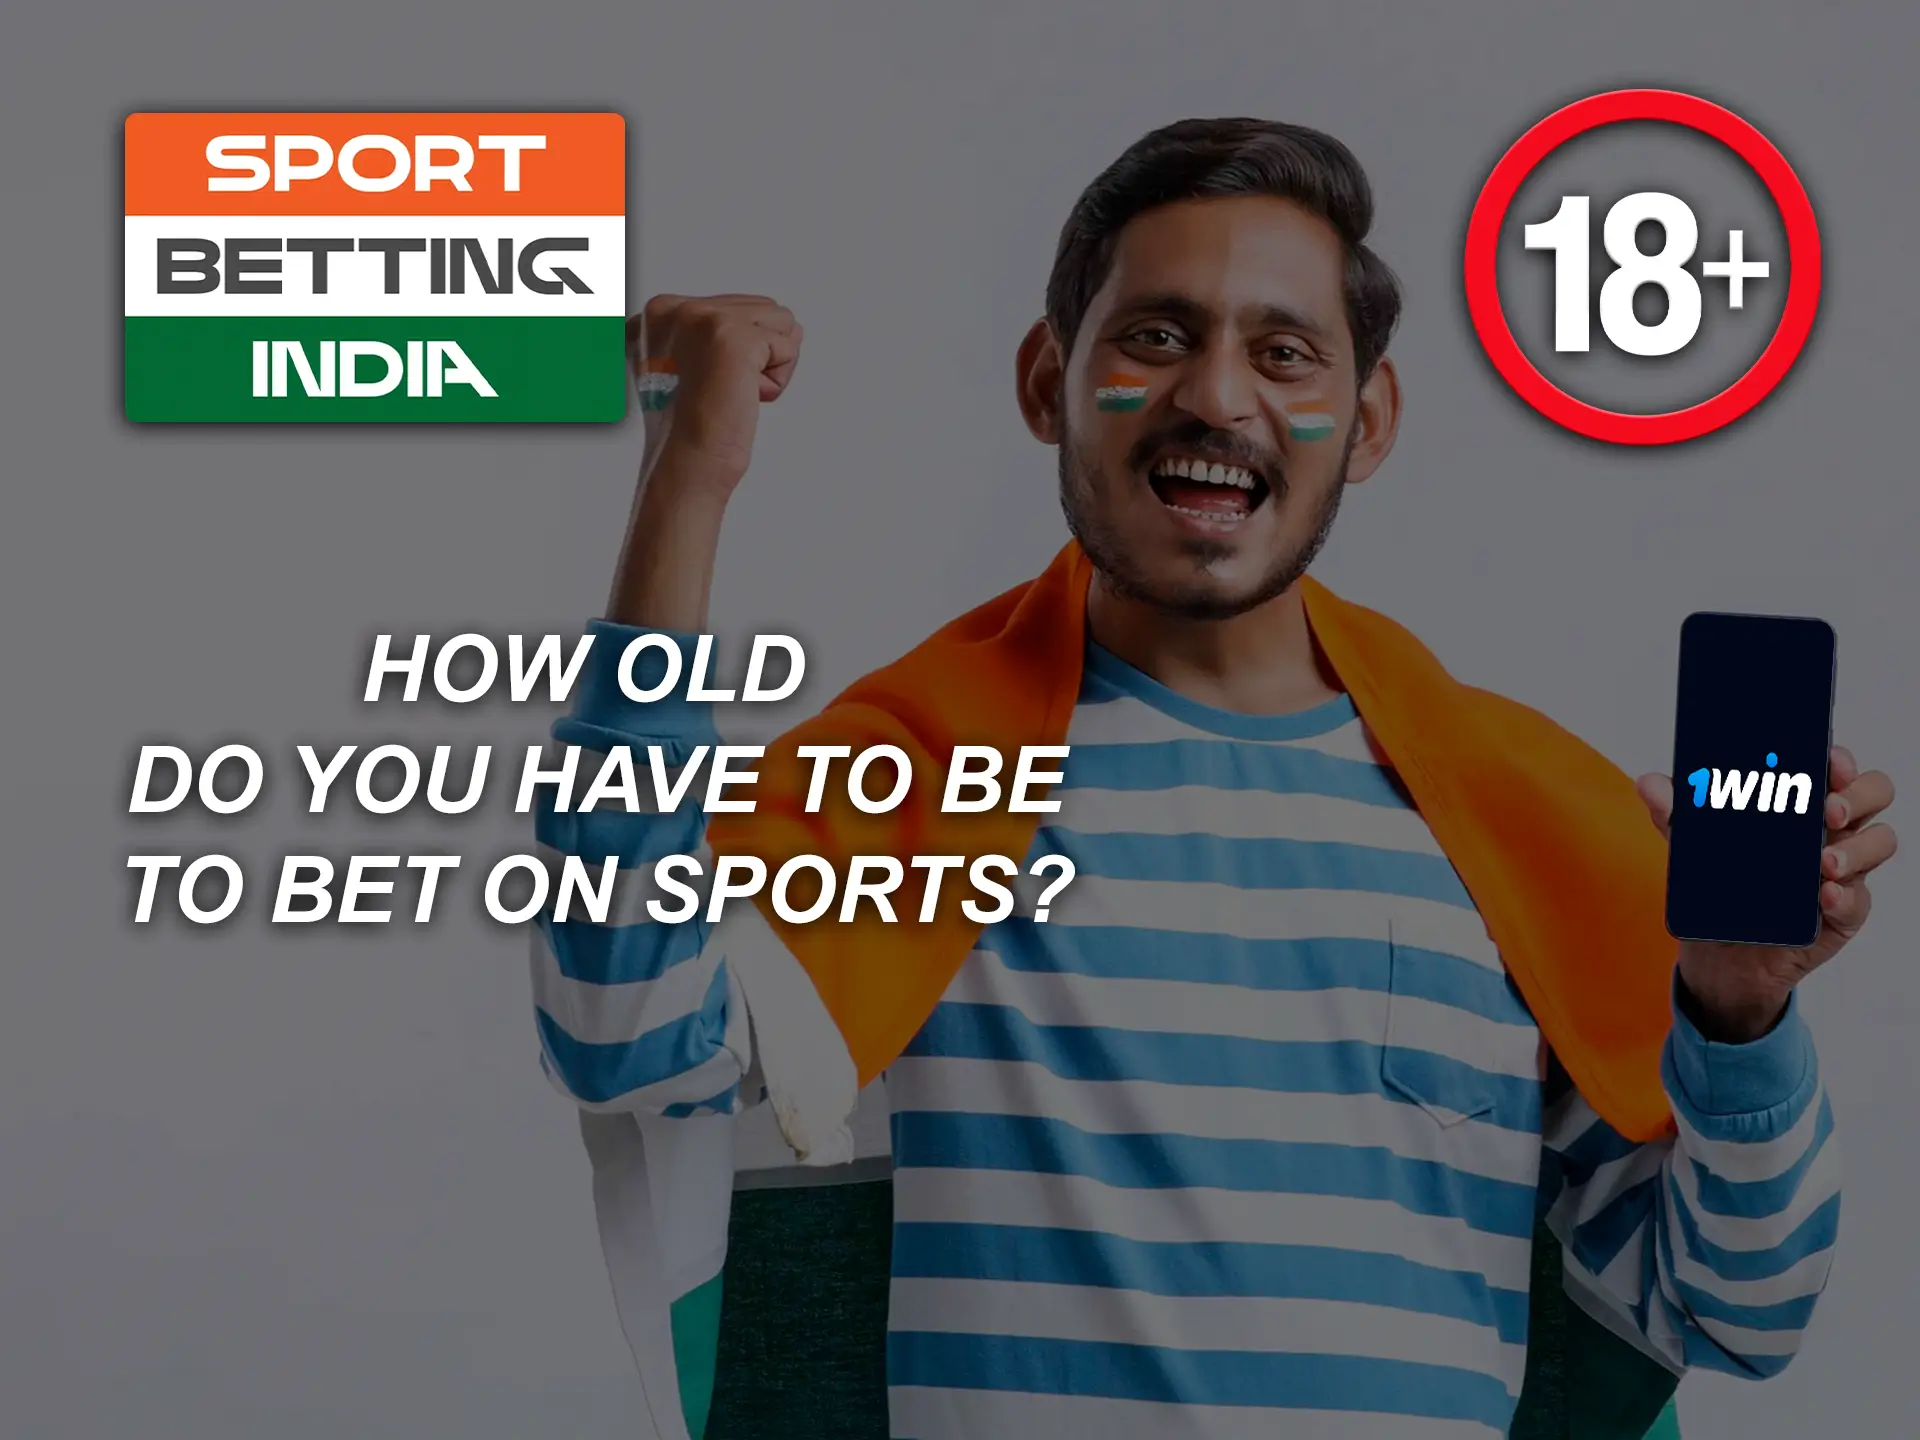 When betting, you need to highlight one and the most important rule, you can only bet after the age of majority.